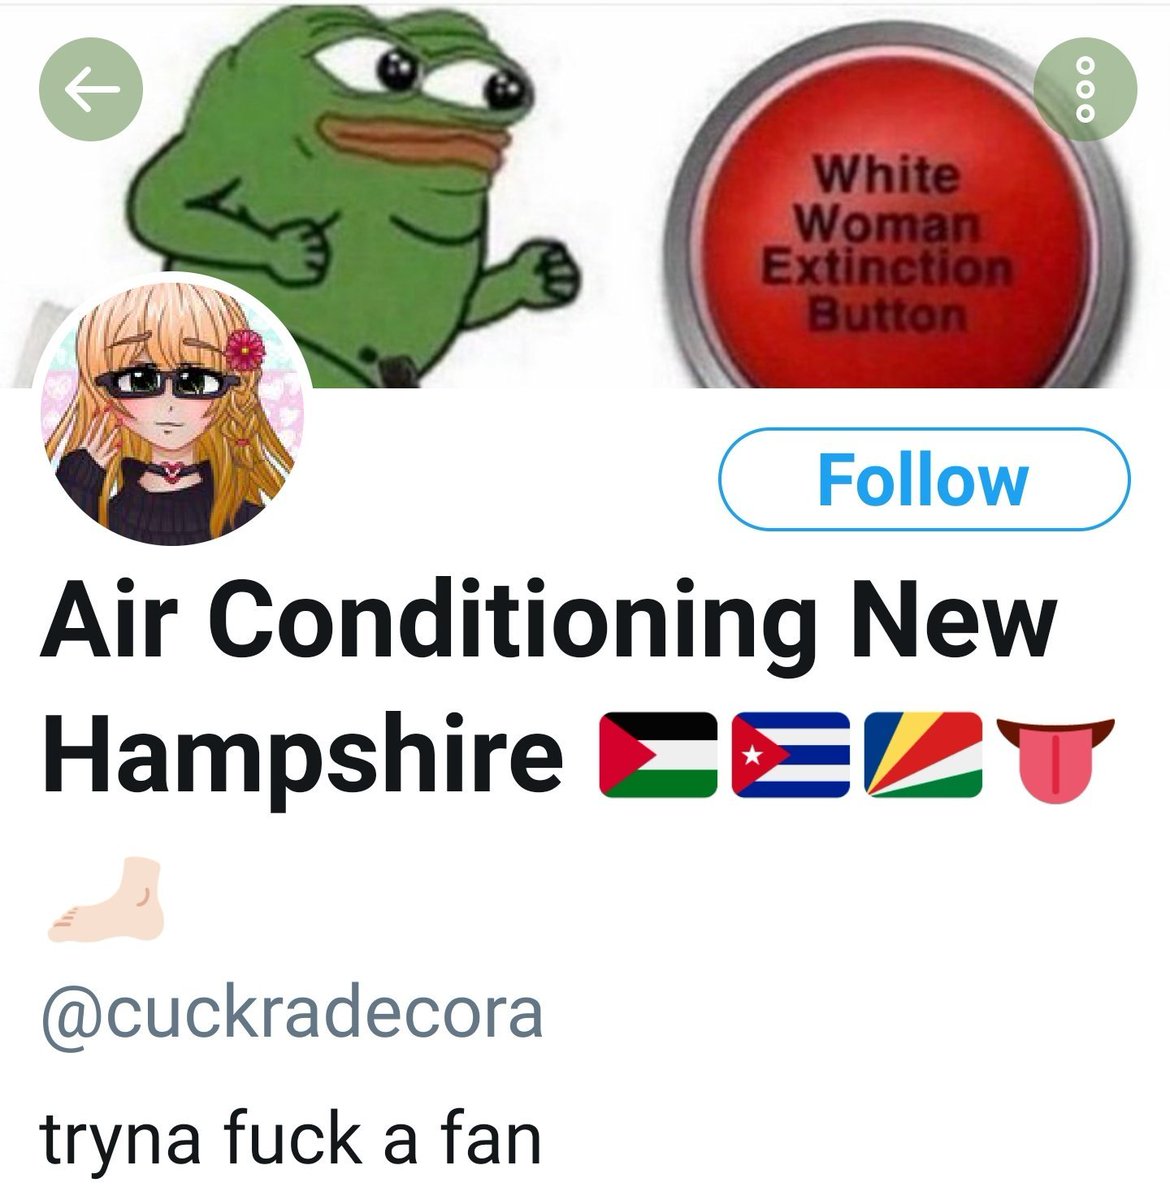 Good ol' TakeDownMRAs calls a commie a right winger because she has a Pepe in her banner.